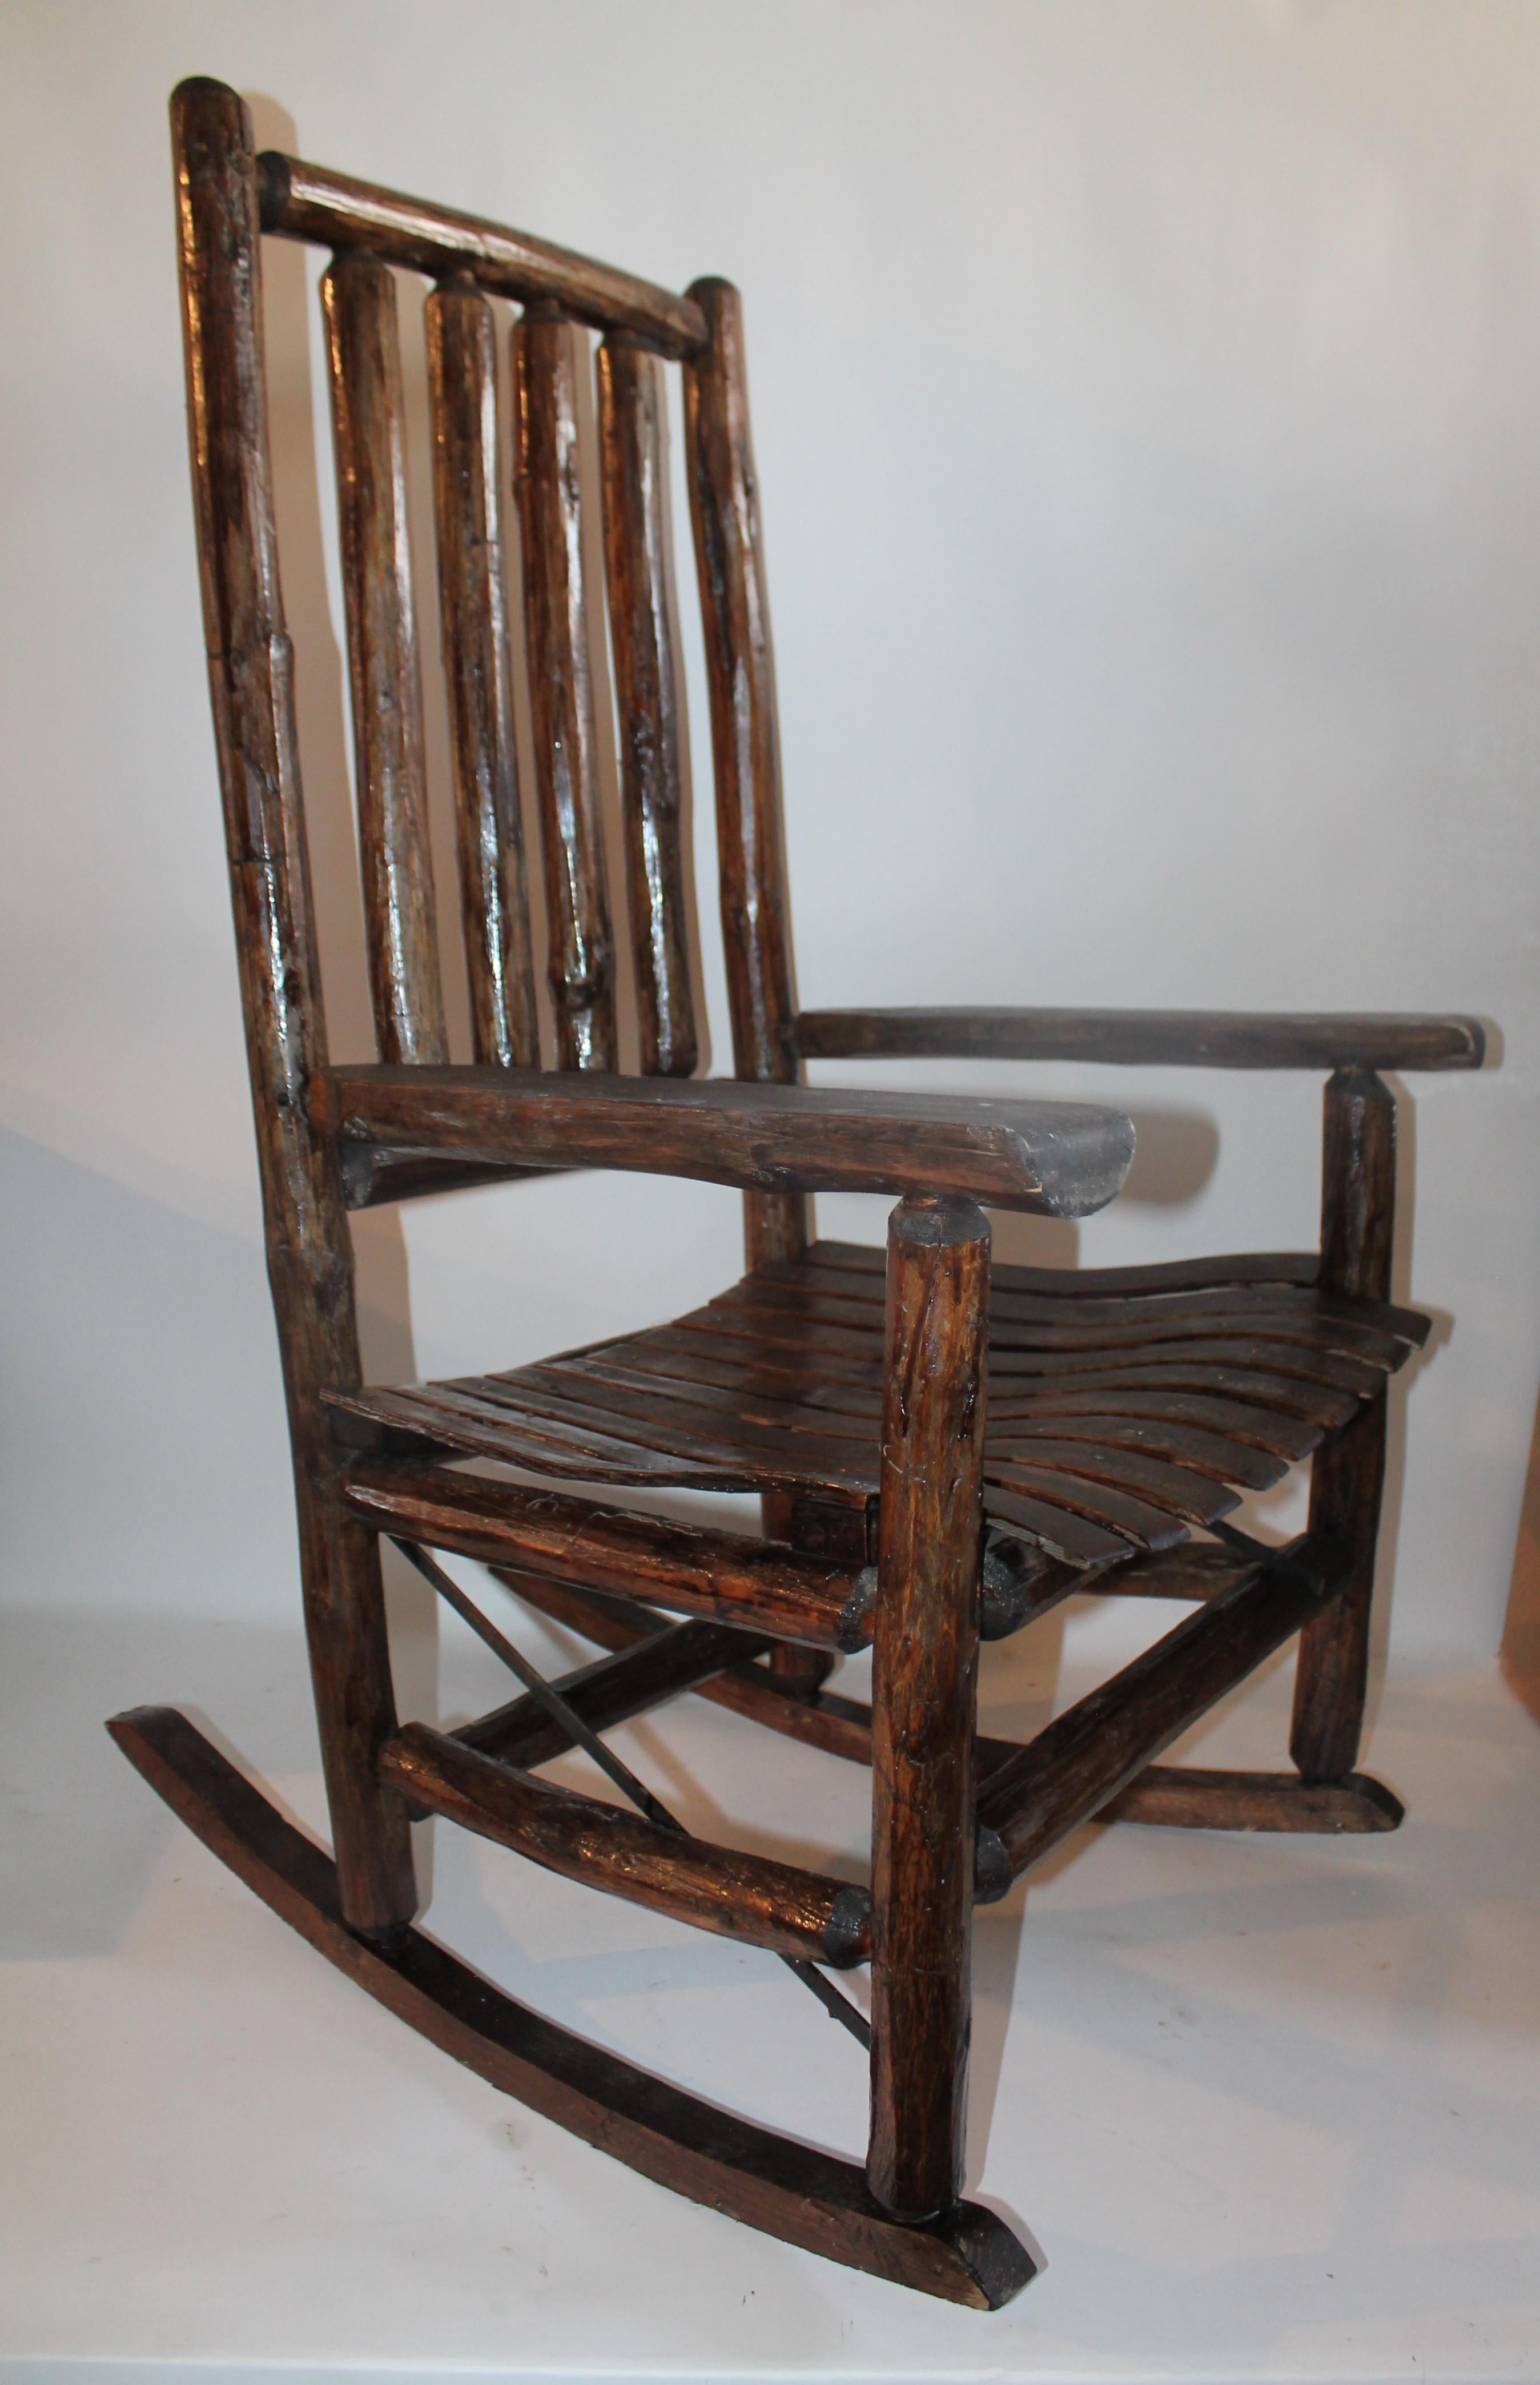 This Fine old hickory rocking chair came from a ranch house in Texas. The condition is very good and it has a coat of all-weather protector varnish.